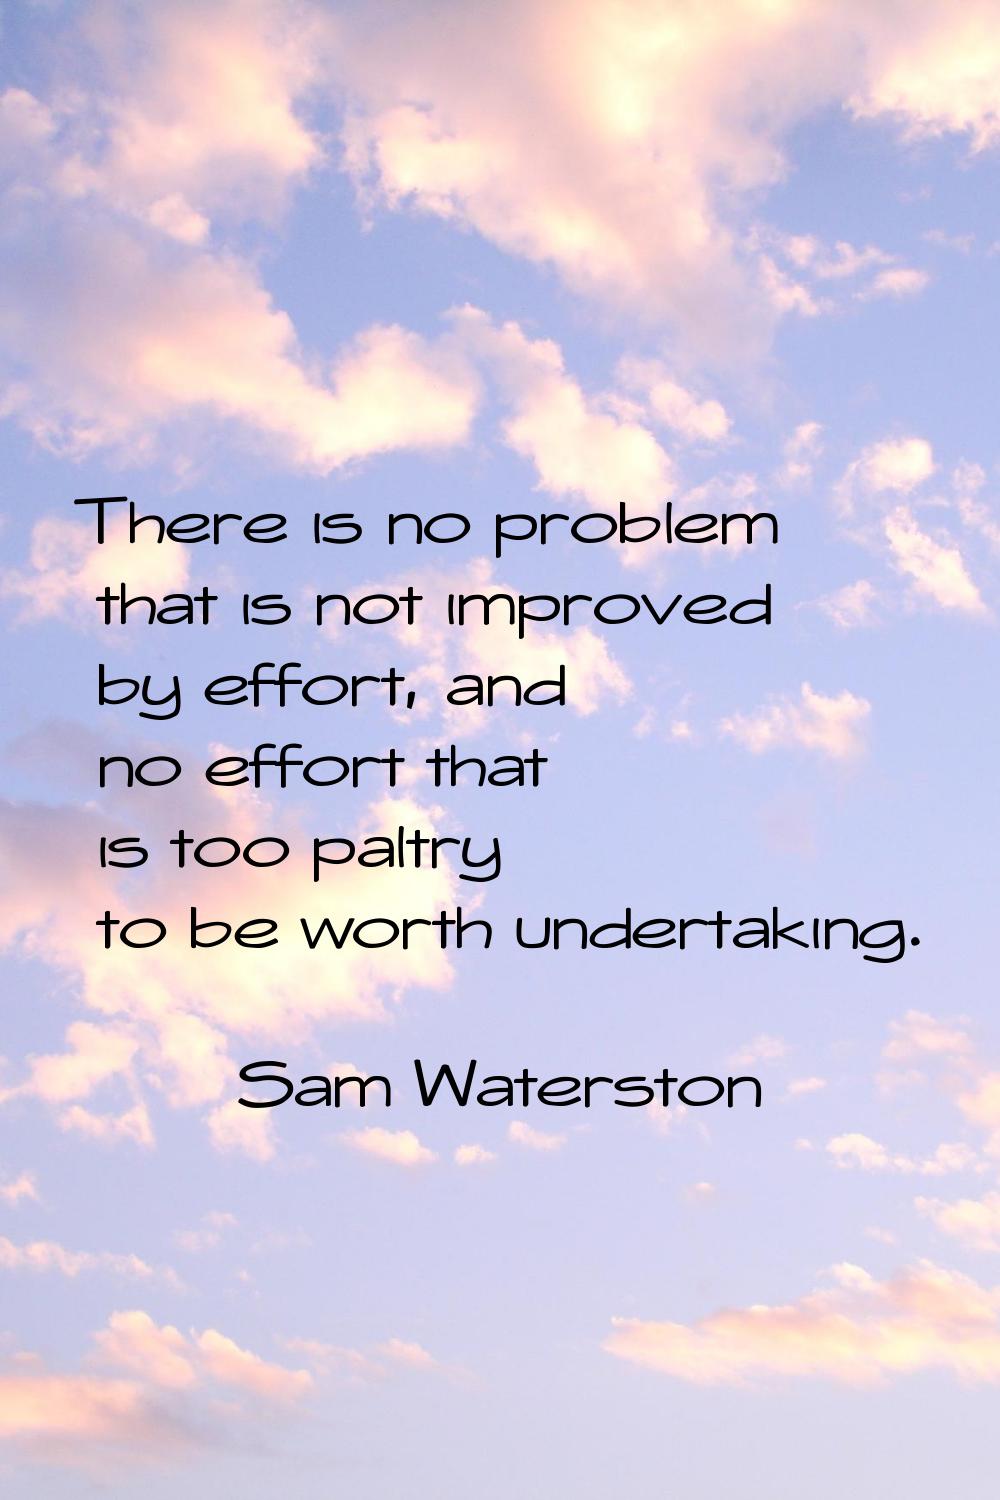 There is no problem that is not improved by effort, and no effort that is too paltry to be worth un